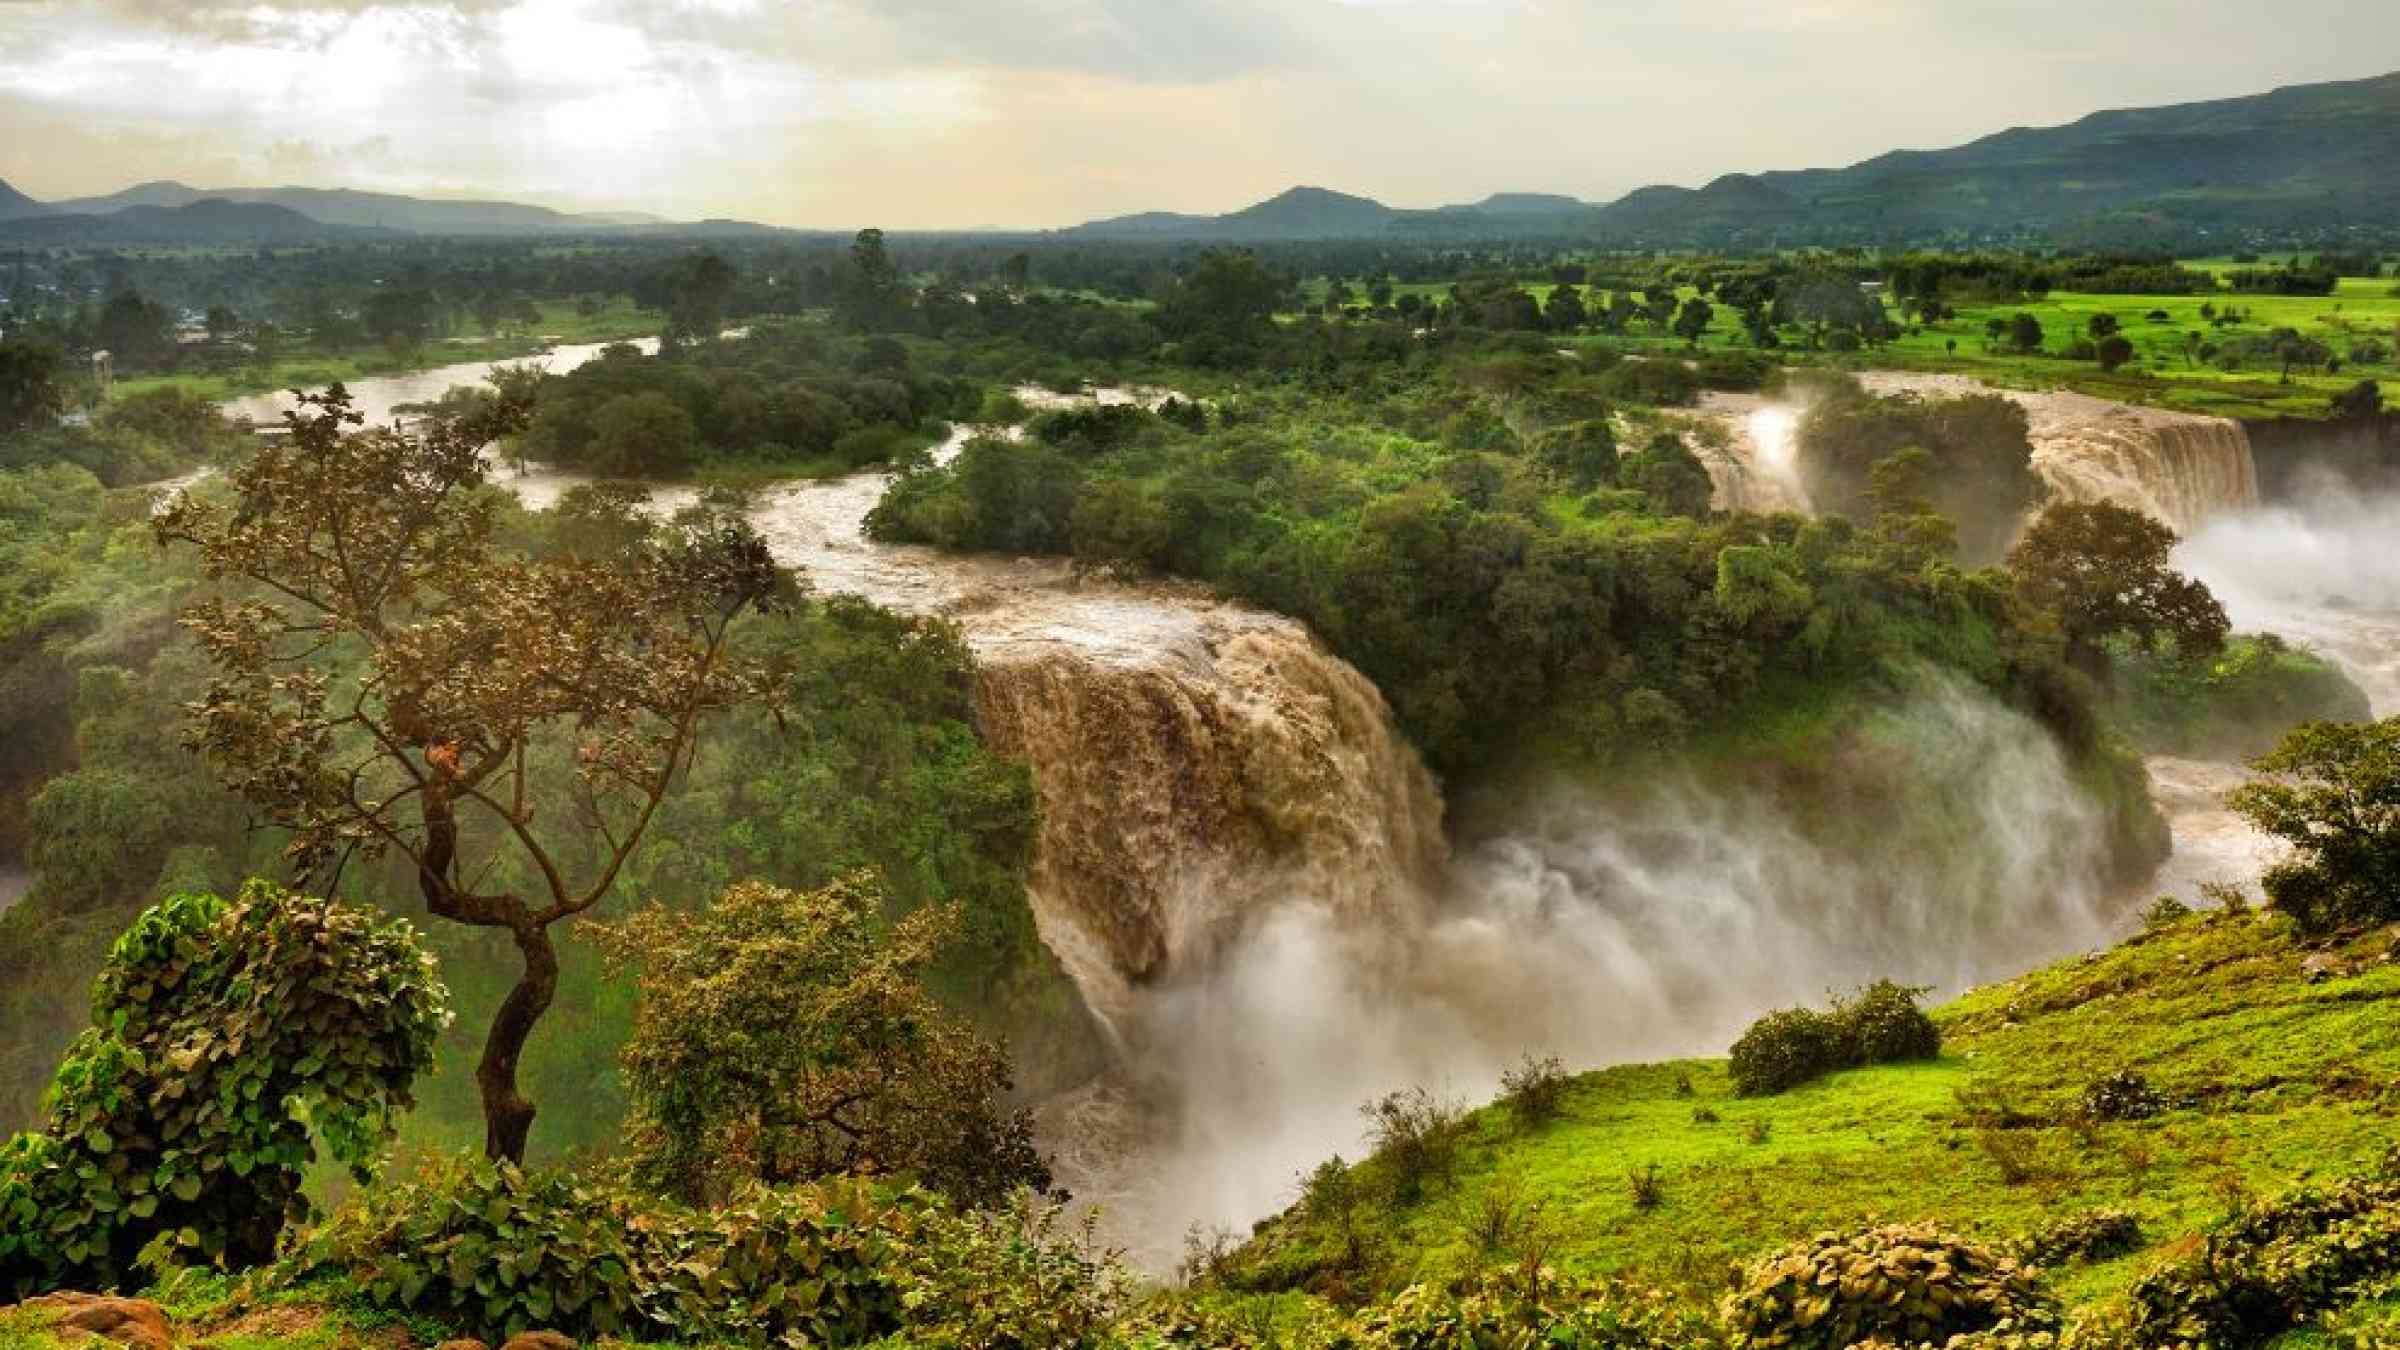 Landscape of the Blue Nile and waterfall in Ethiopia